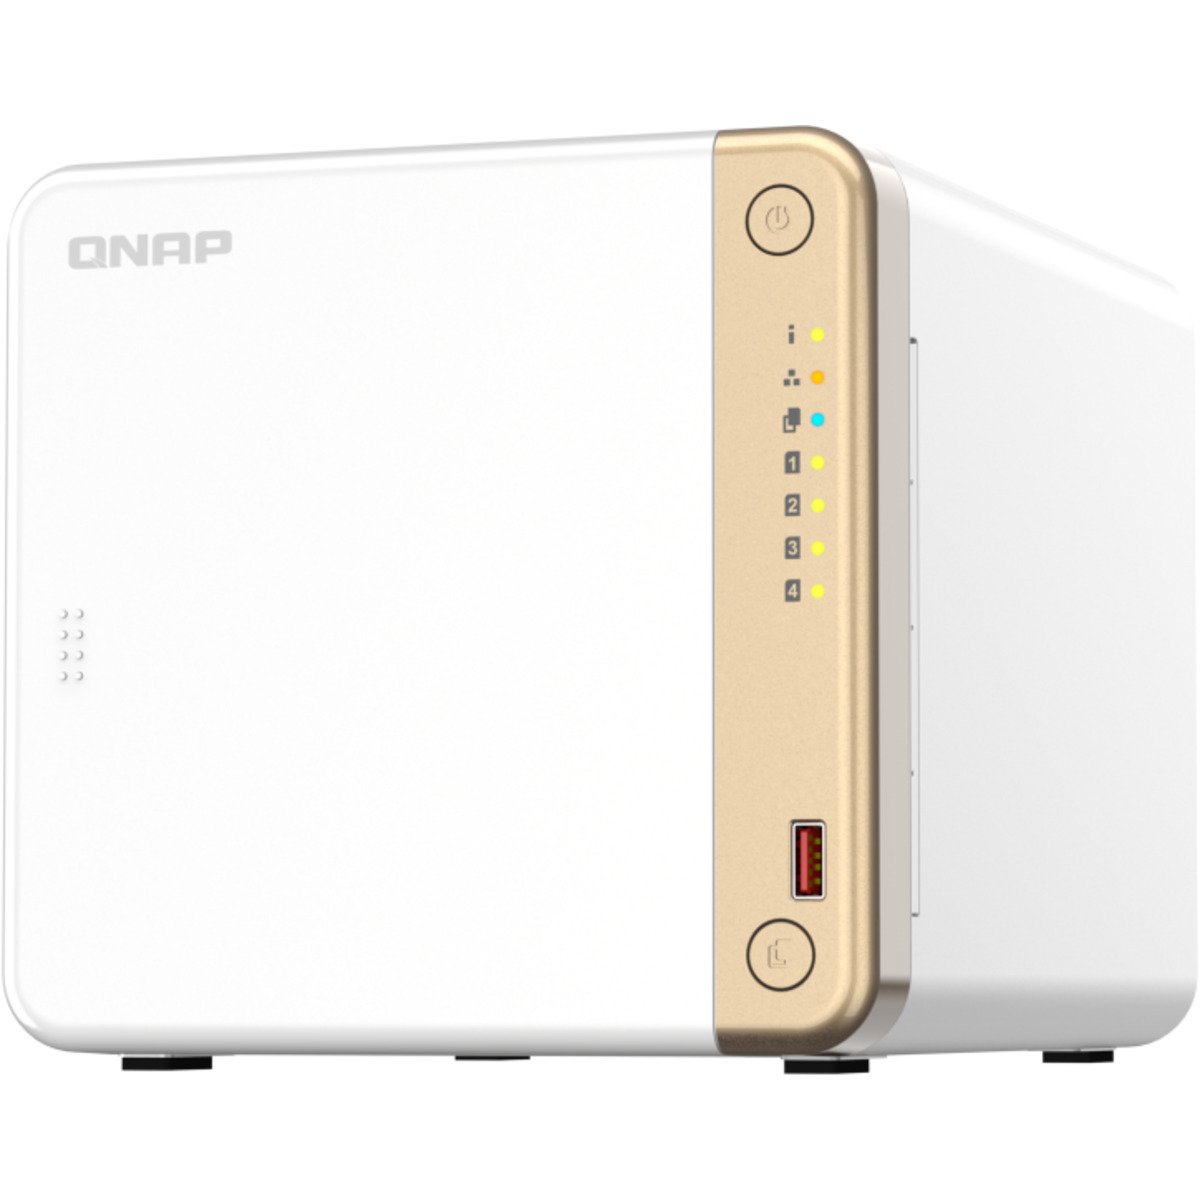 QNAP TS-462 96tb 4-Bay Desktop Multimedia / Power User / Business NAS - Network Attached Storage Device 4x24tb Western Digital Red Pro WD240KFGX 3.5 7200rpm SATA 6Gb/s HDD NAS Class Drives Installed - Burn-In Tested - ON SALE TS-462